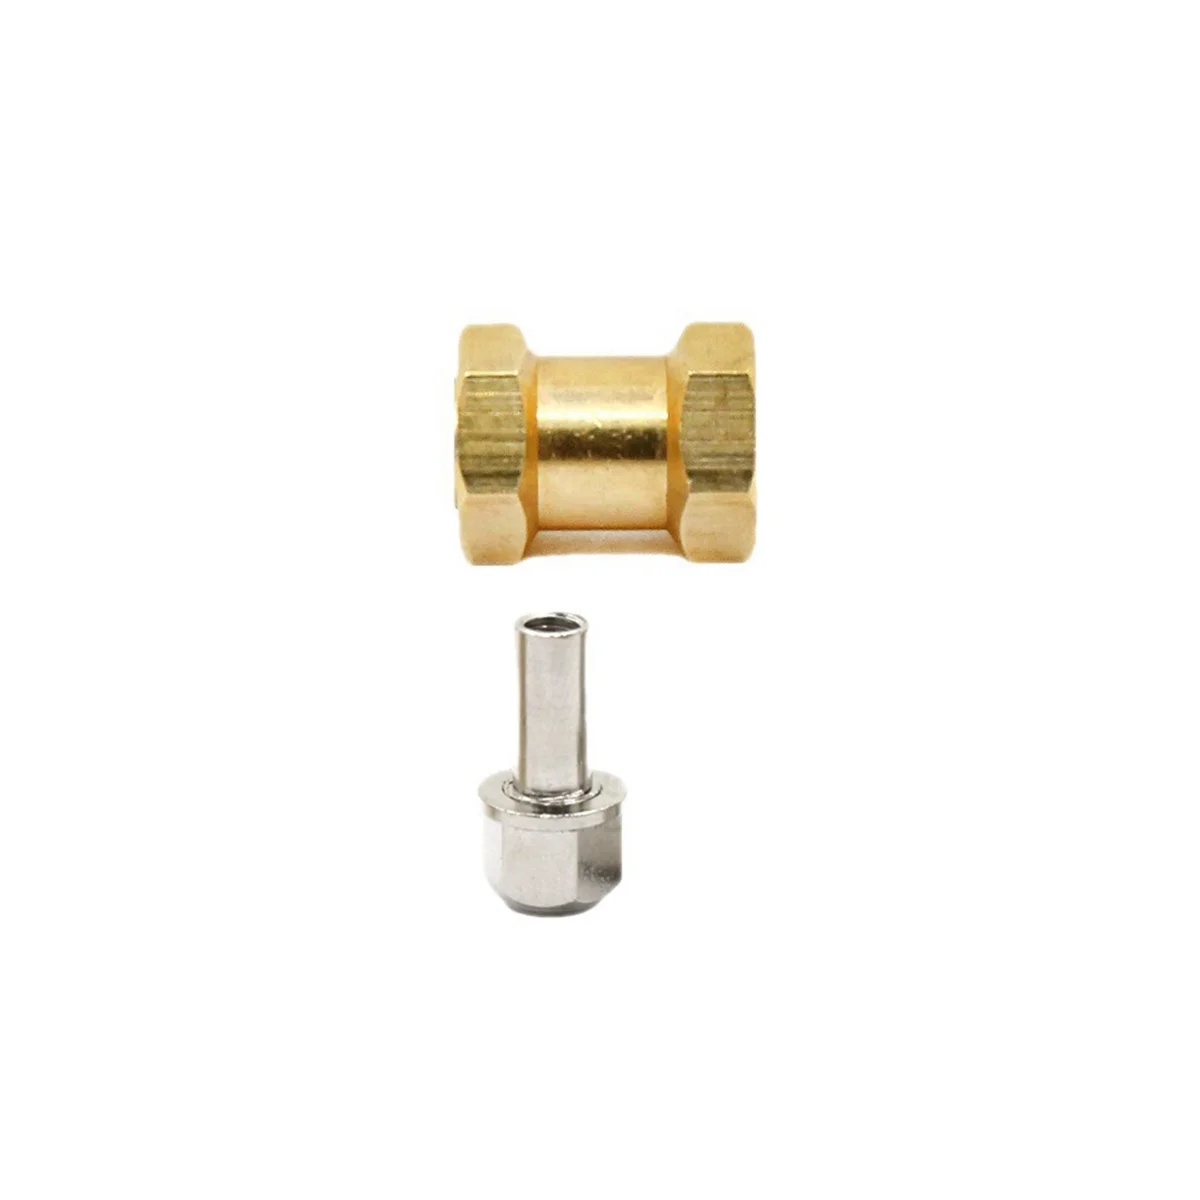 For CC01 SCX10 1/10 Climbing Car Brass Hexagon Lengthening and Widening Coupler,17Mm images - 6